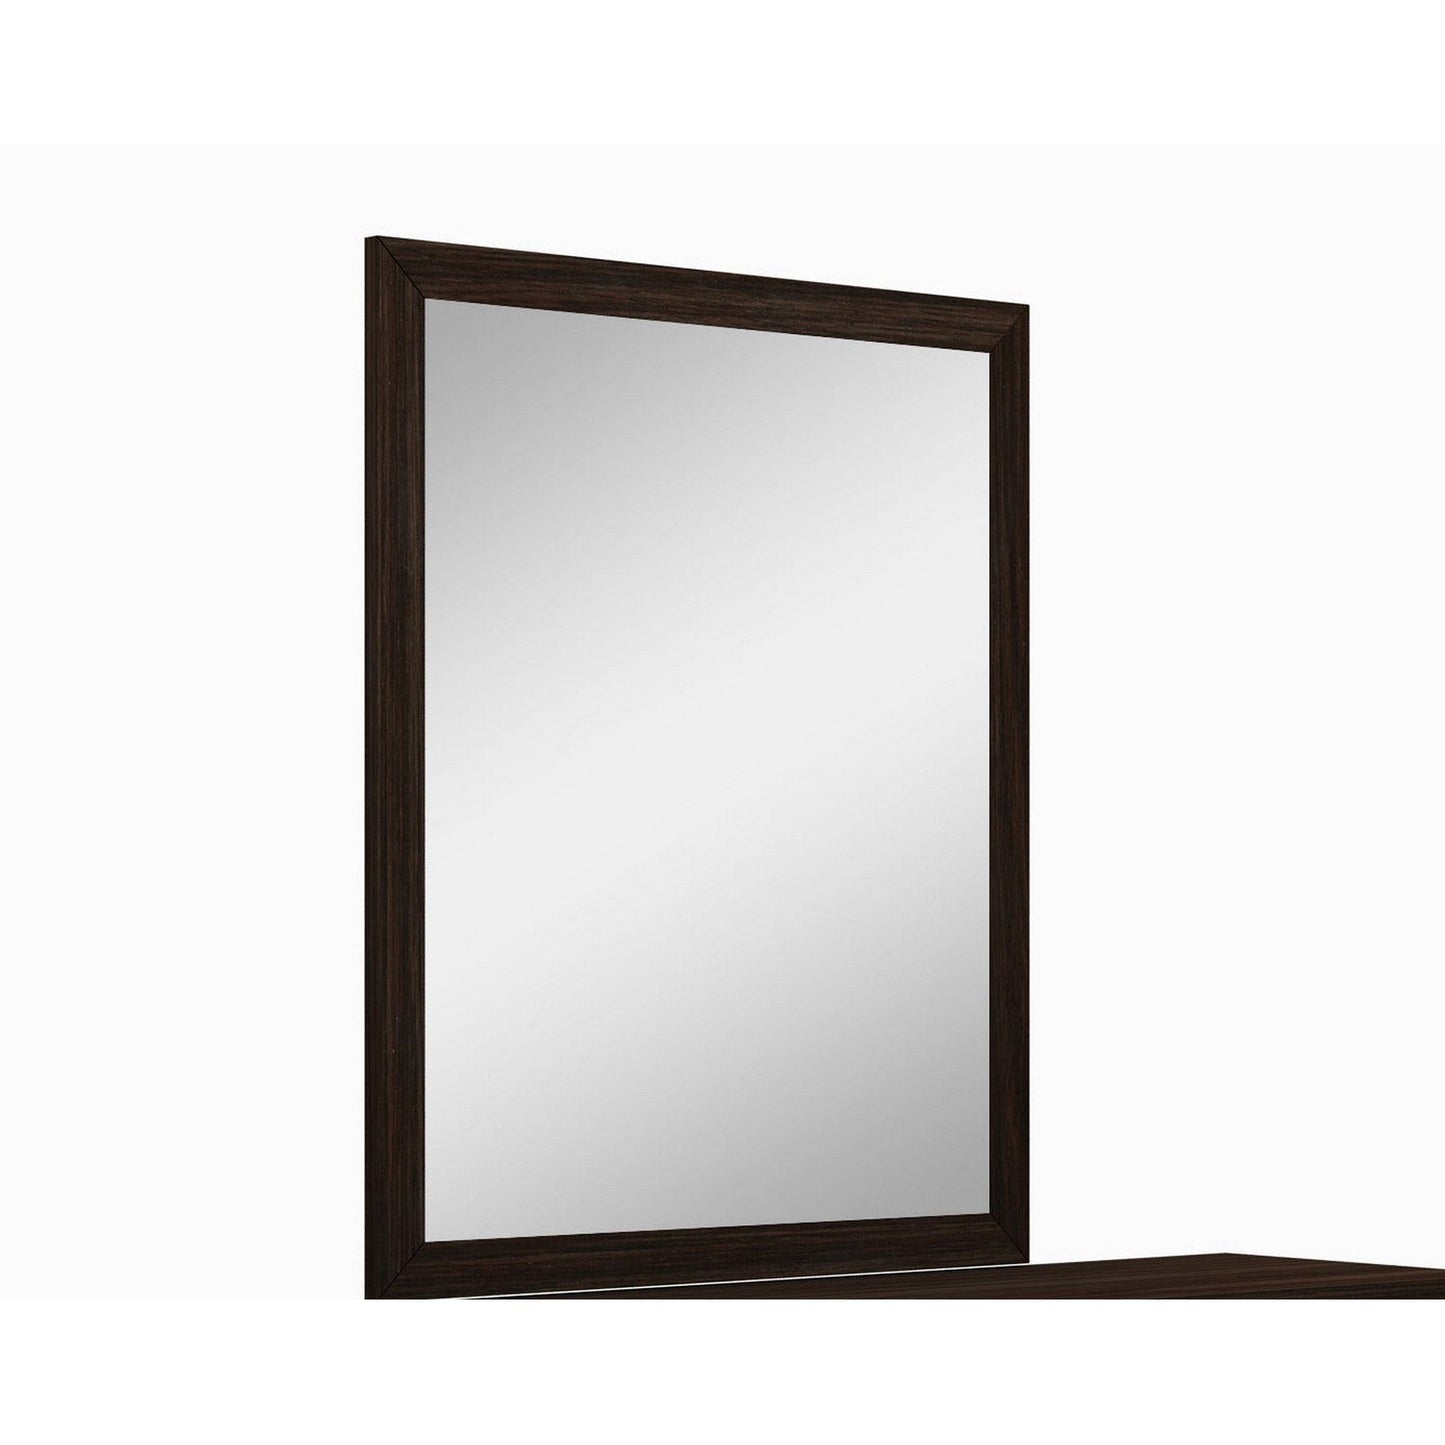 HomeRoots 43" Refined High Gloss Mirror In Wenge Finish